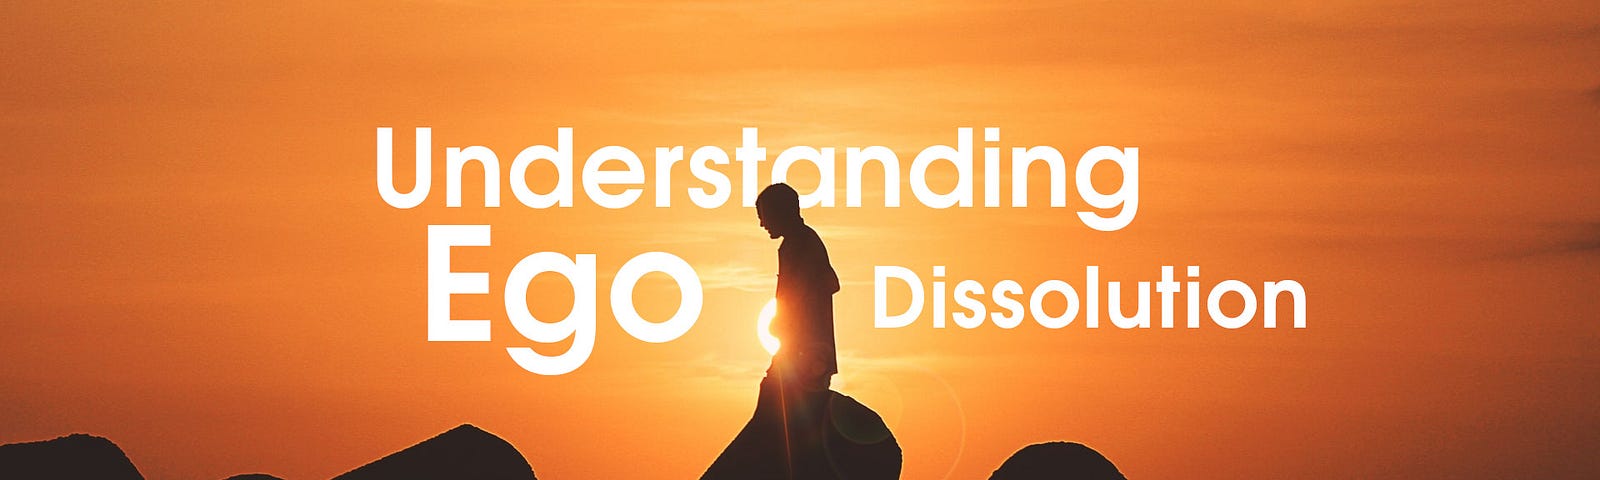 what is ego death dissolution